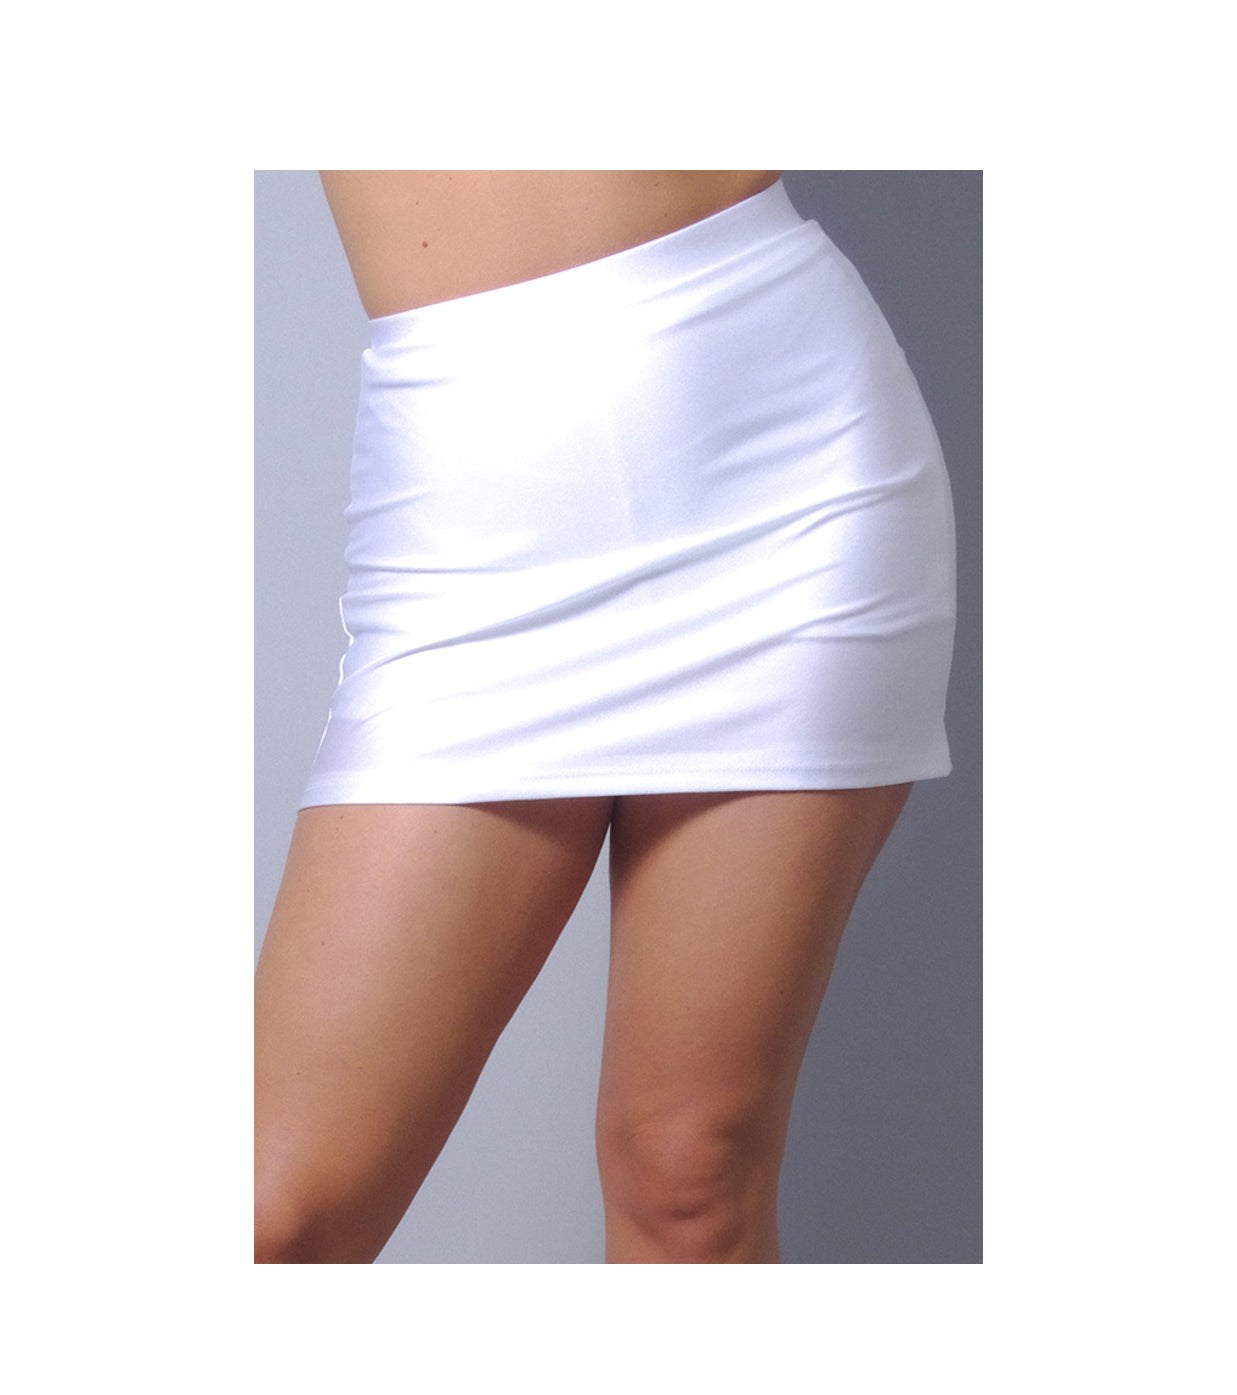 Sexy and Chic Basic Tennis Skort in White in Size S, M, or L by Cefian